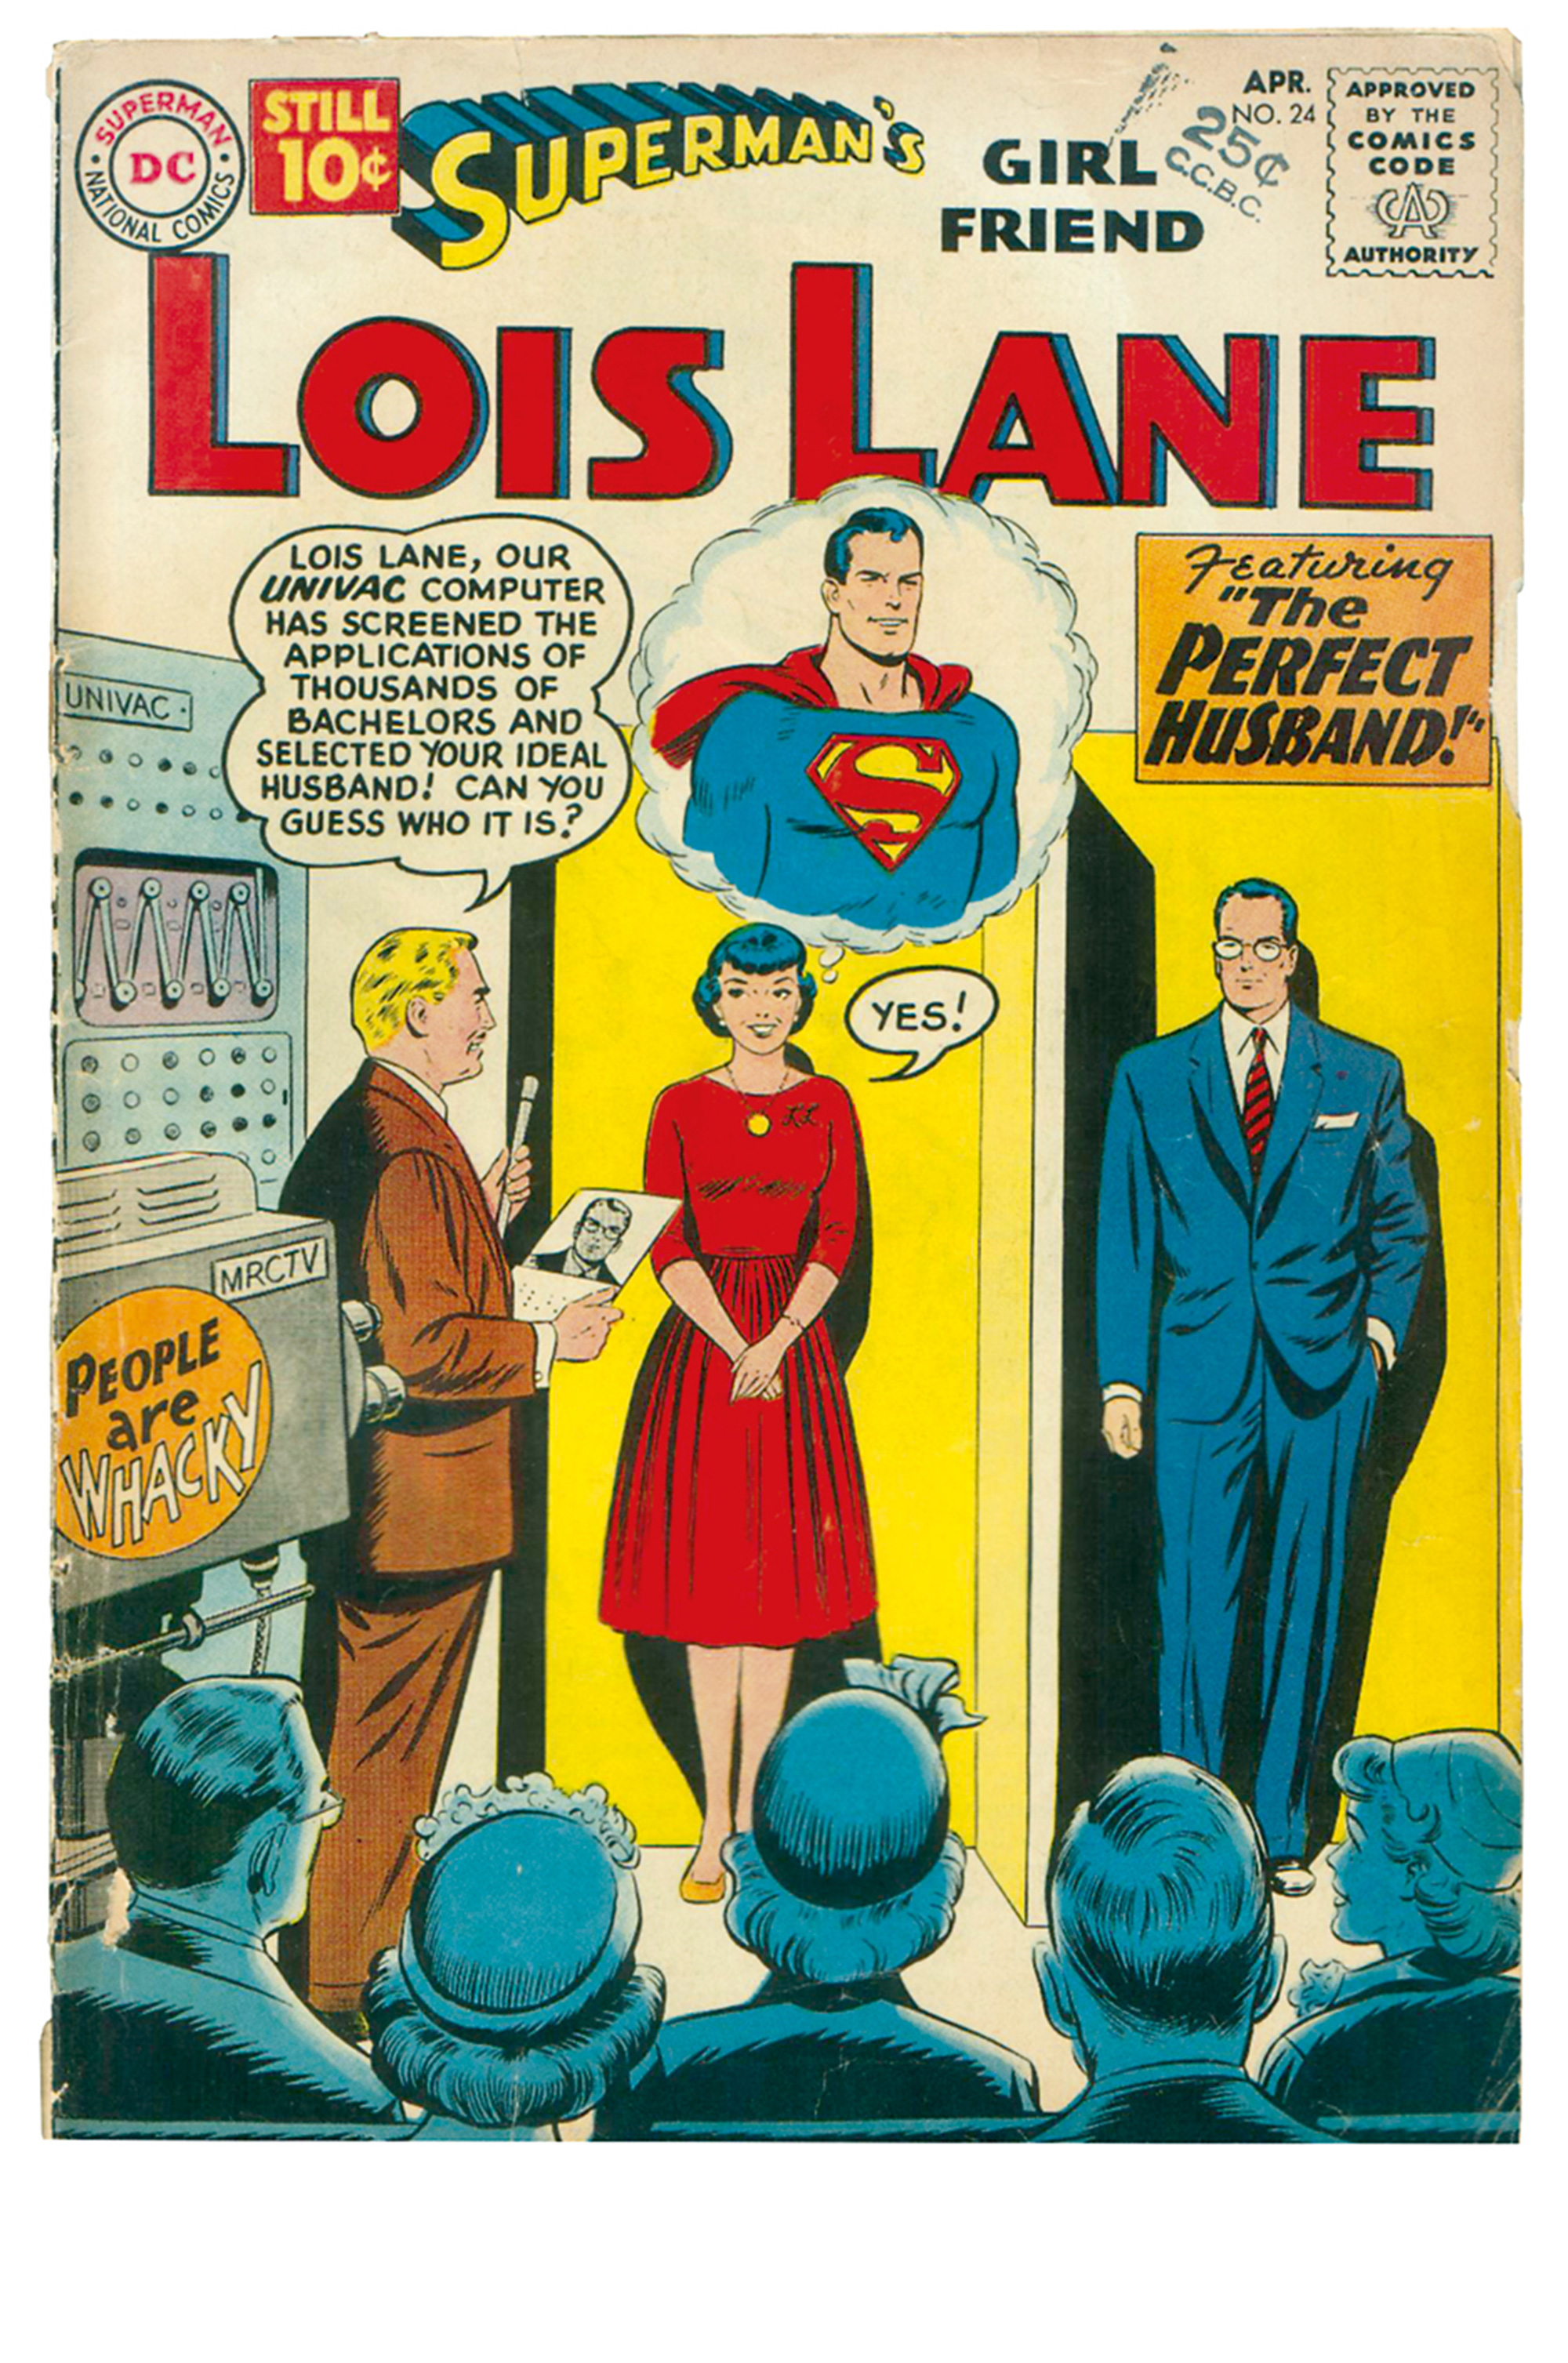 A nineteen sixty-one cover of an issue of “Superman’s Girlfriend, Lois Lane.”